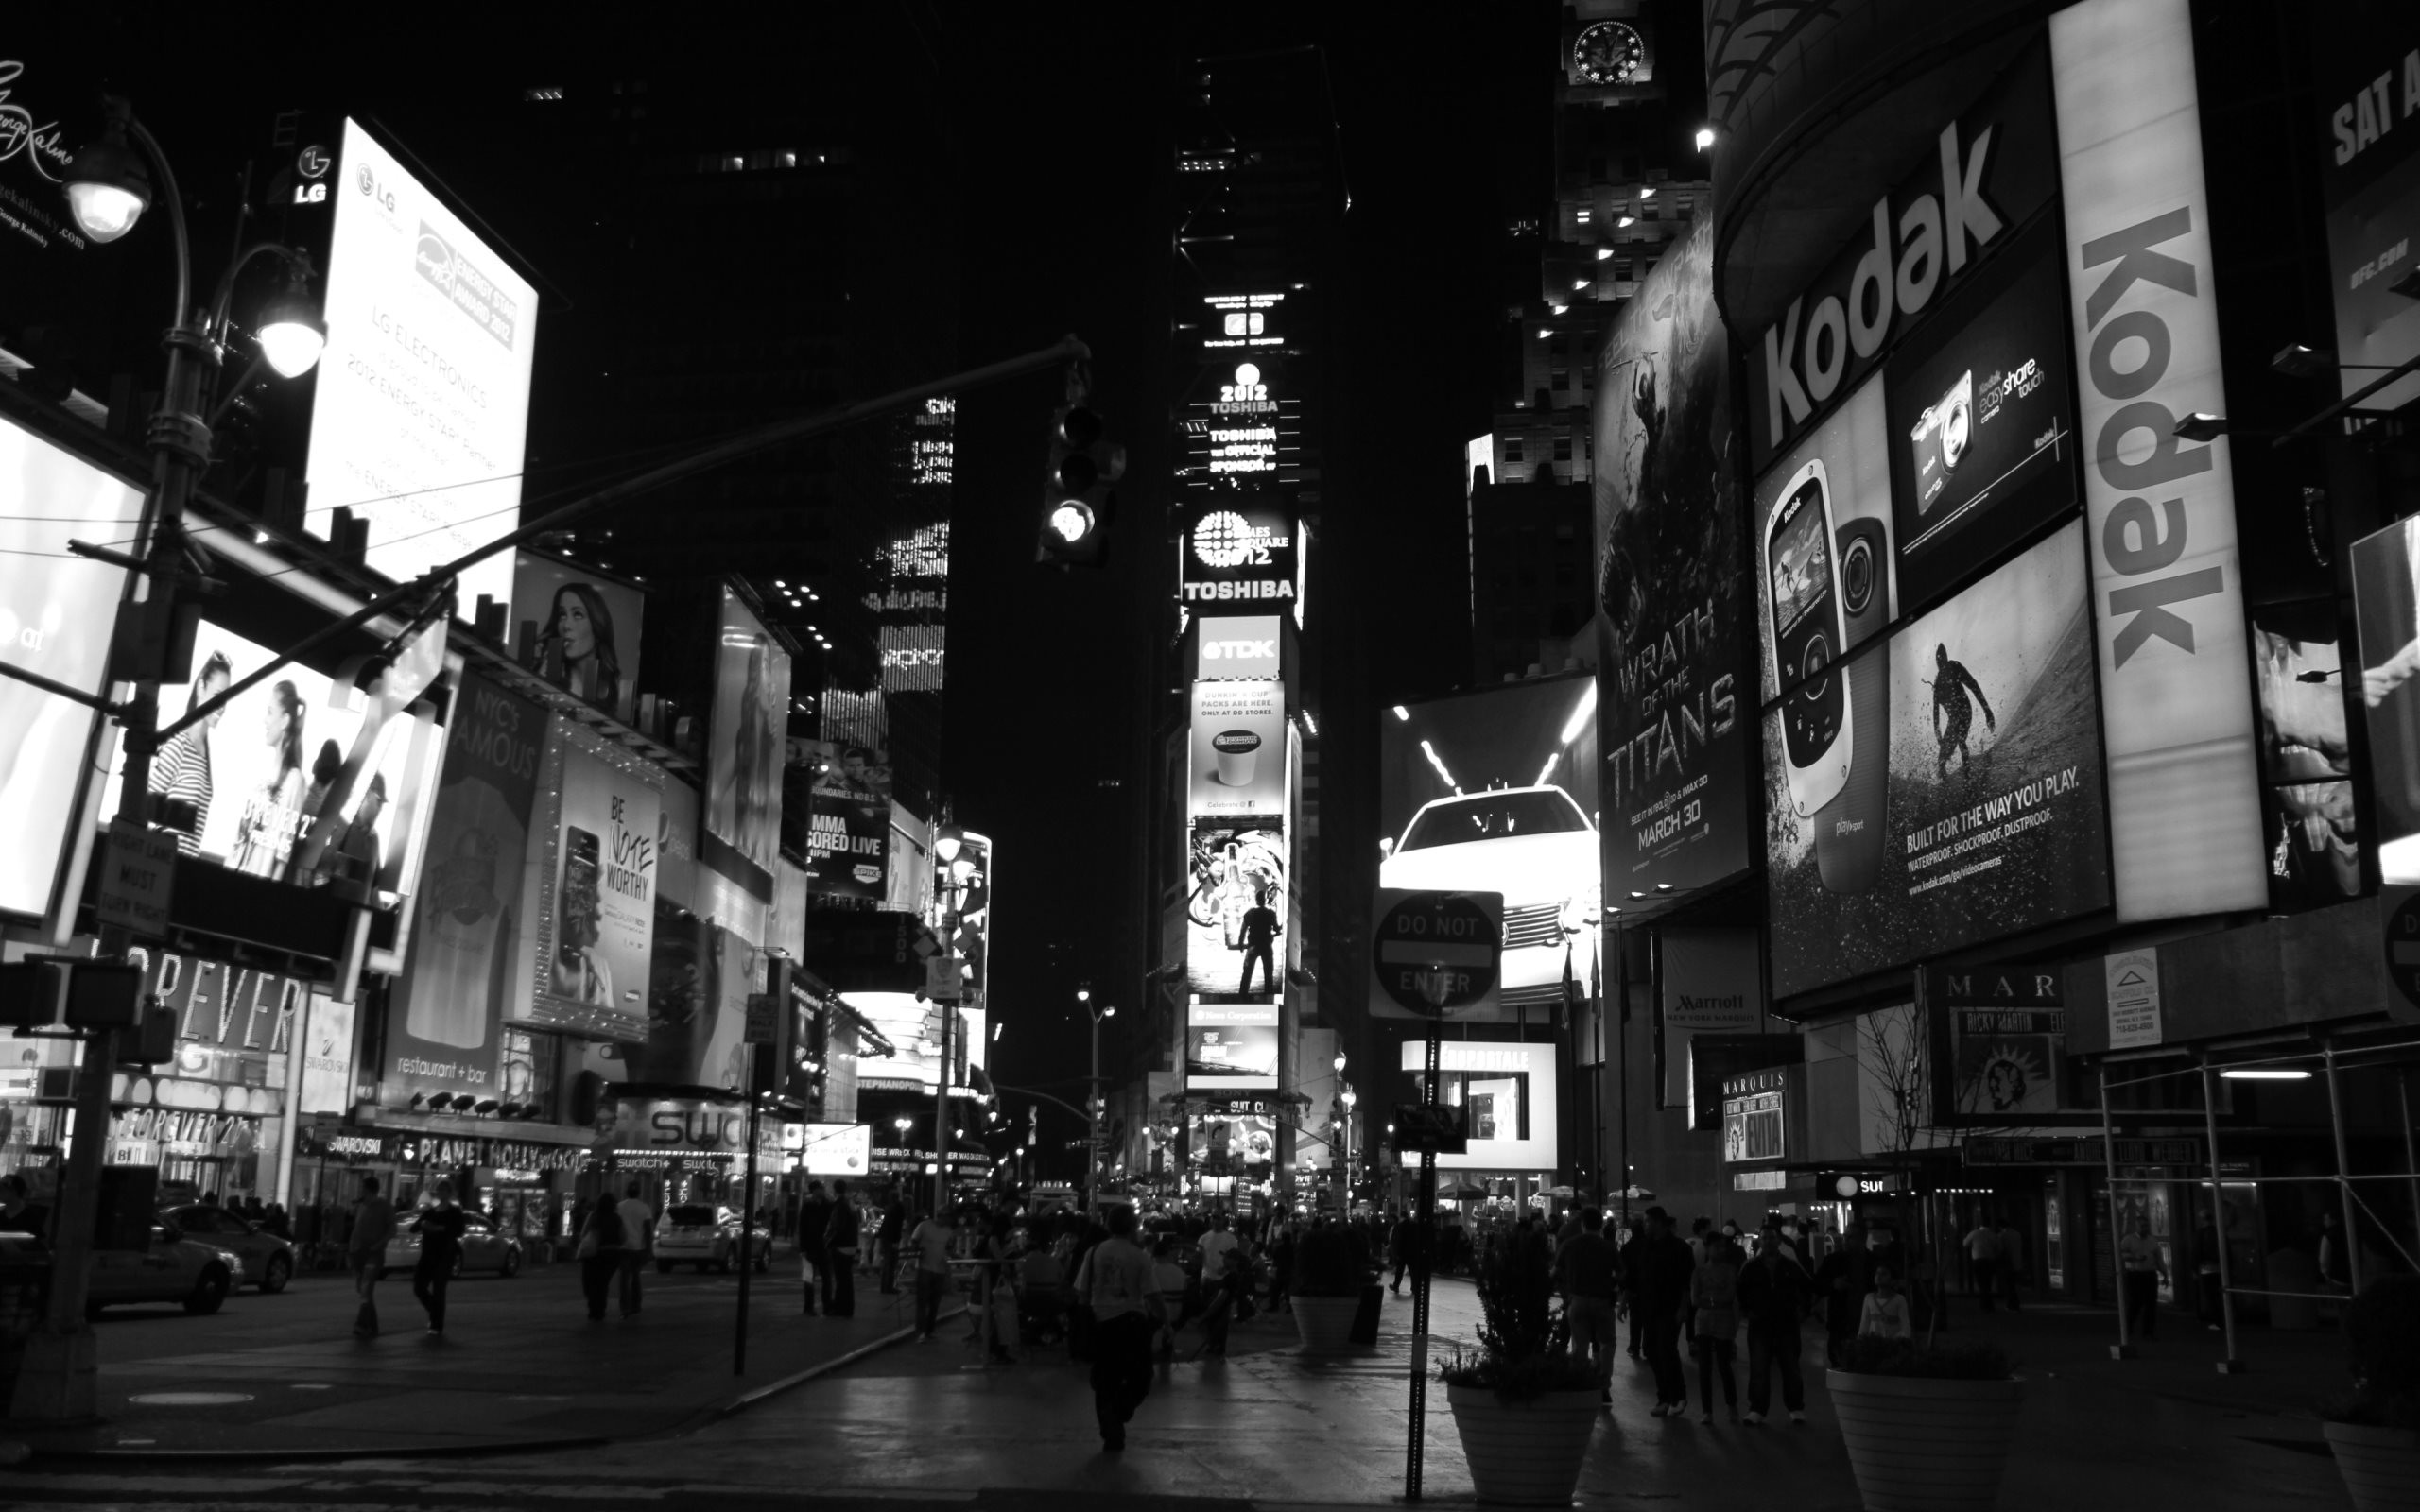 2560x1600 4K HD Wallpaper: Times square at night in black and white